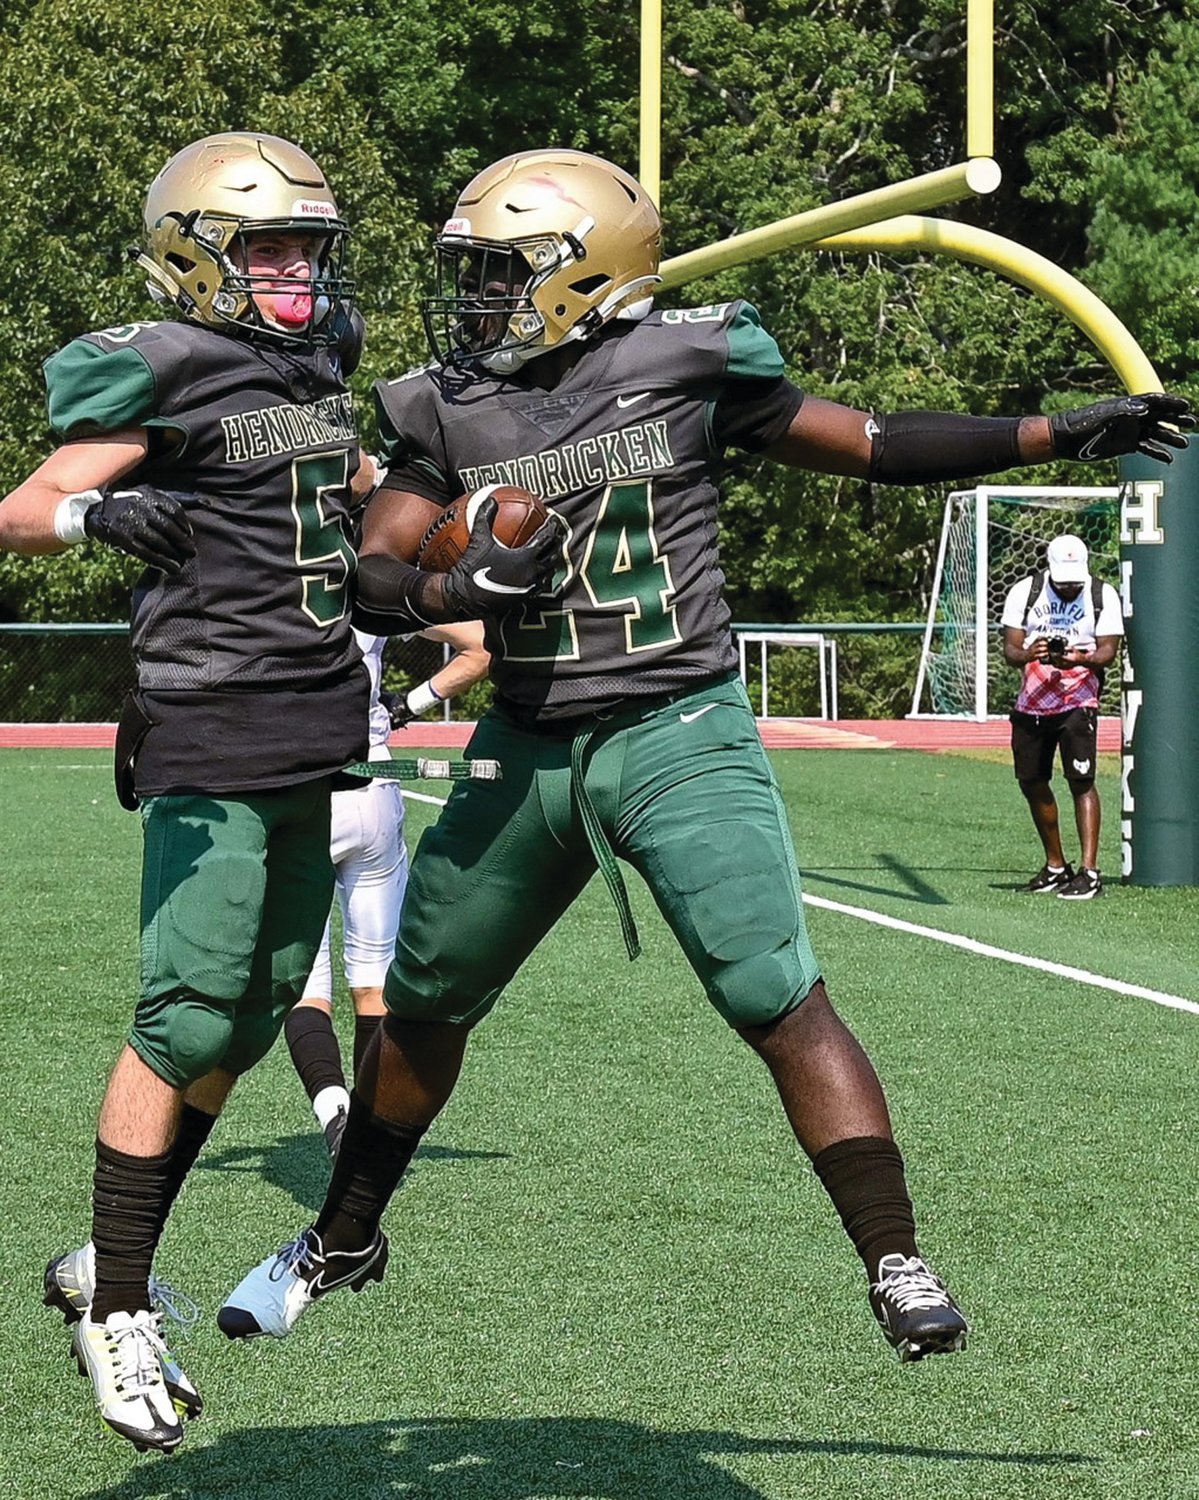 END ZONE: Bishop Hendricken’s Ronjai Francis and Anthony Manna celebrate after scoring a touchdown against Londonderry, New Hampshire at home last weekend. The Hawks kicked off their season by taking on two out-of-state teams and would go 1-1 in the process. Hendricken returned home and is getting ready to face Division I power North Kingstown this weekend for its first league contest of the fall season. (Photos by Leo van Dijk/rhodyphoto.zenfolio.com)